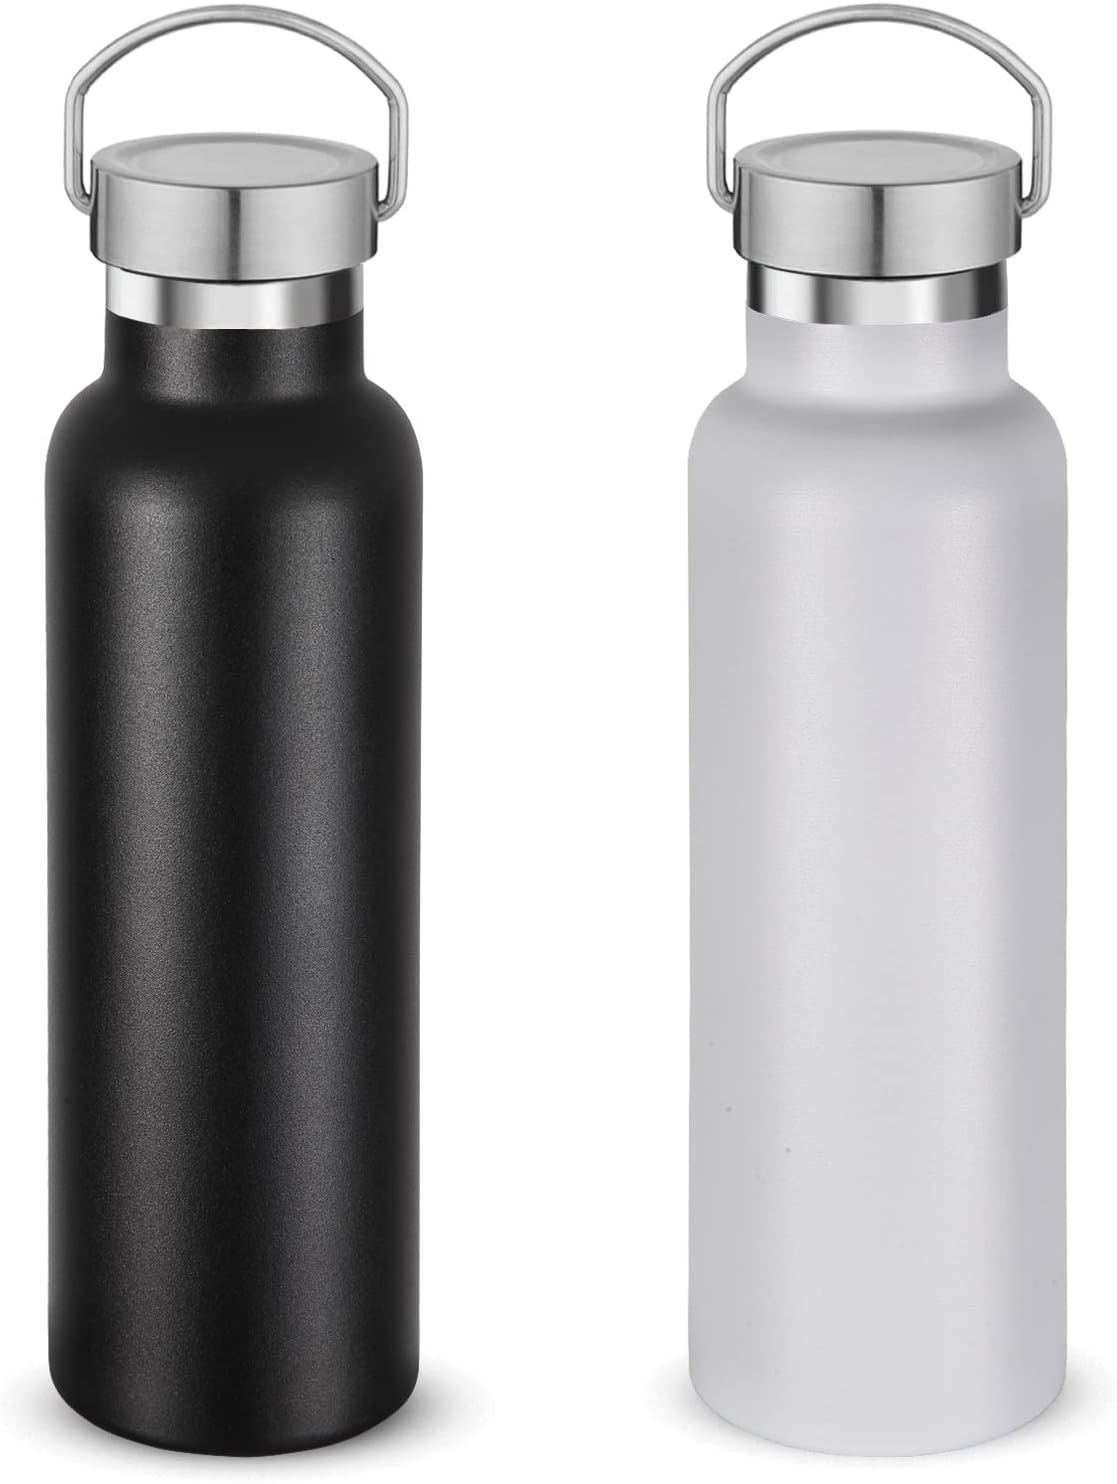 Neihepal 20 oz Insulated Water Bottles Bulk 2 Pack,Stainless Steel Double Wall Sport Bottle with ... | Amazon (US)